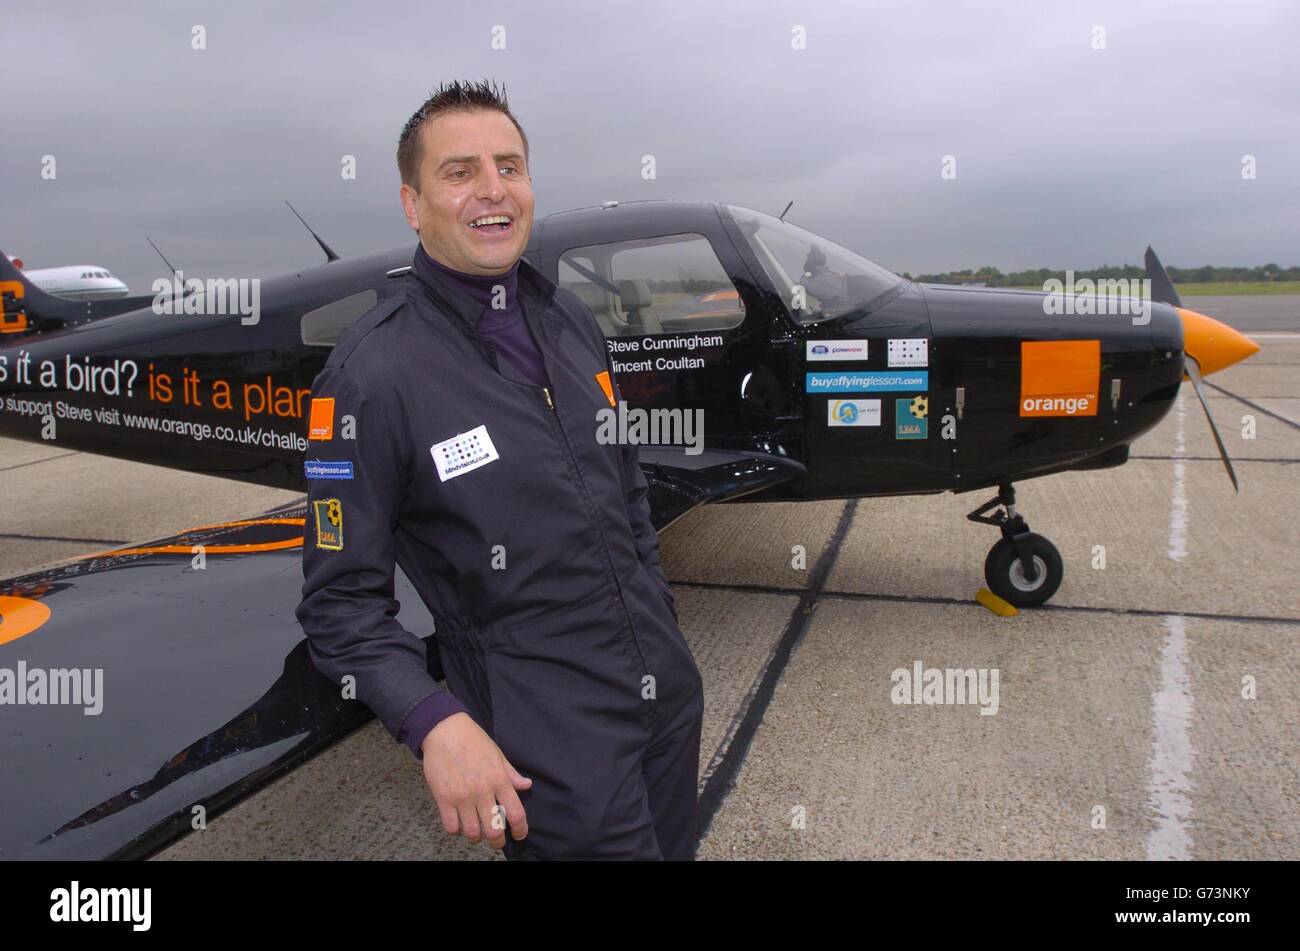 A daredevil sportsman who lost his sight at the age of 12 took to the skies today in a bid to become the first blind person to fly a plane around the UK. Blind Pilot Steve Cunningham seated in a Piper Warrior at Biggin Hill Airport on the first leg (to Newcastle) of his five day mission to be the first Blind Pilot to fly a light Aircraft around the UK. Stock Photo